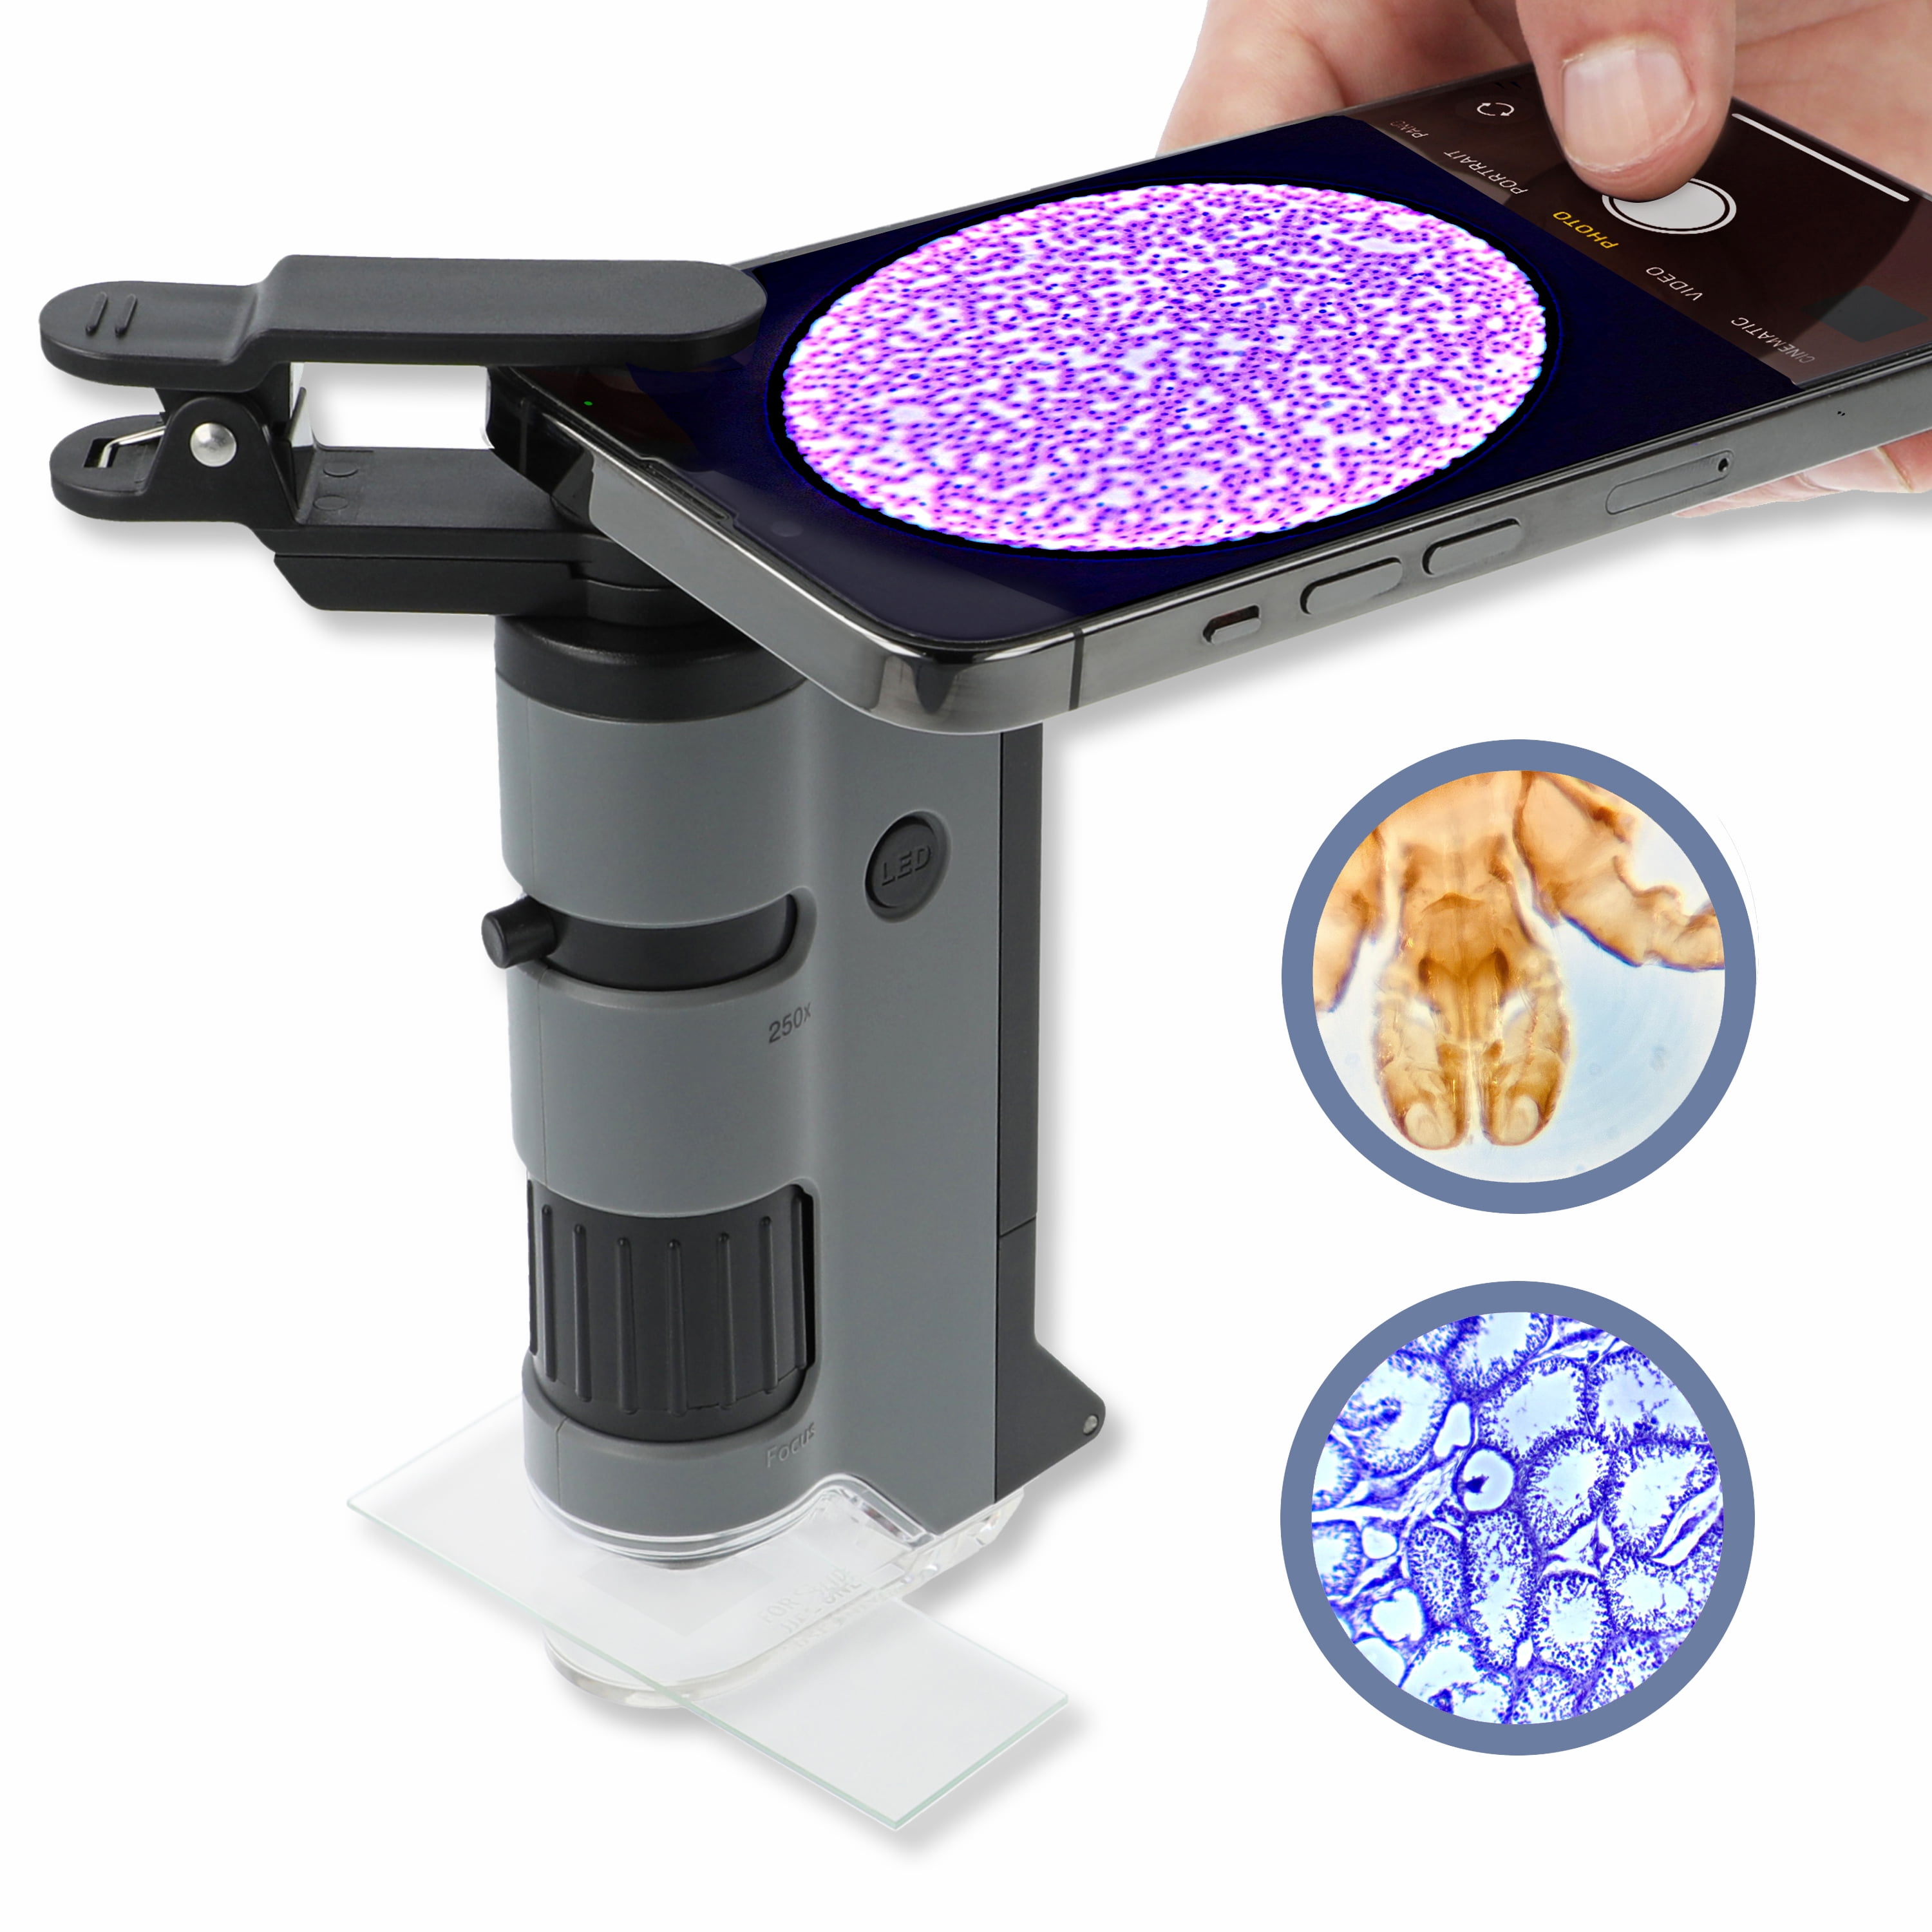 Carson MicroMini Pocket Microscope with Smartphone Adapter